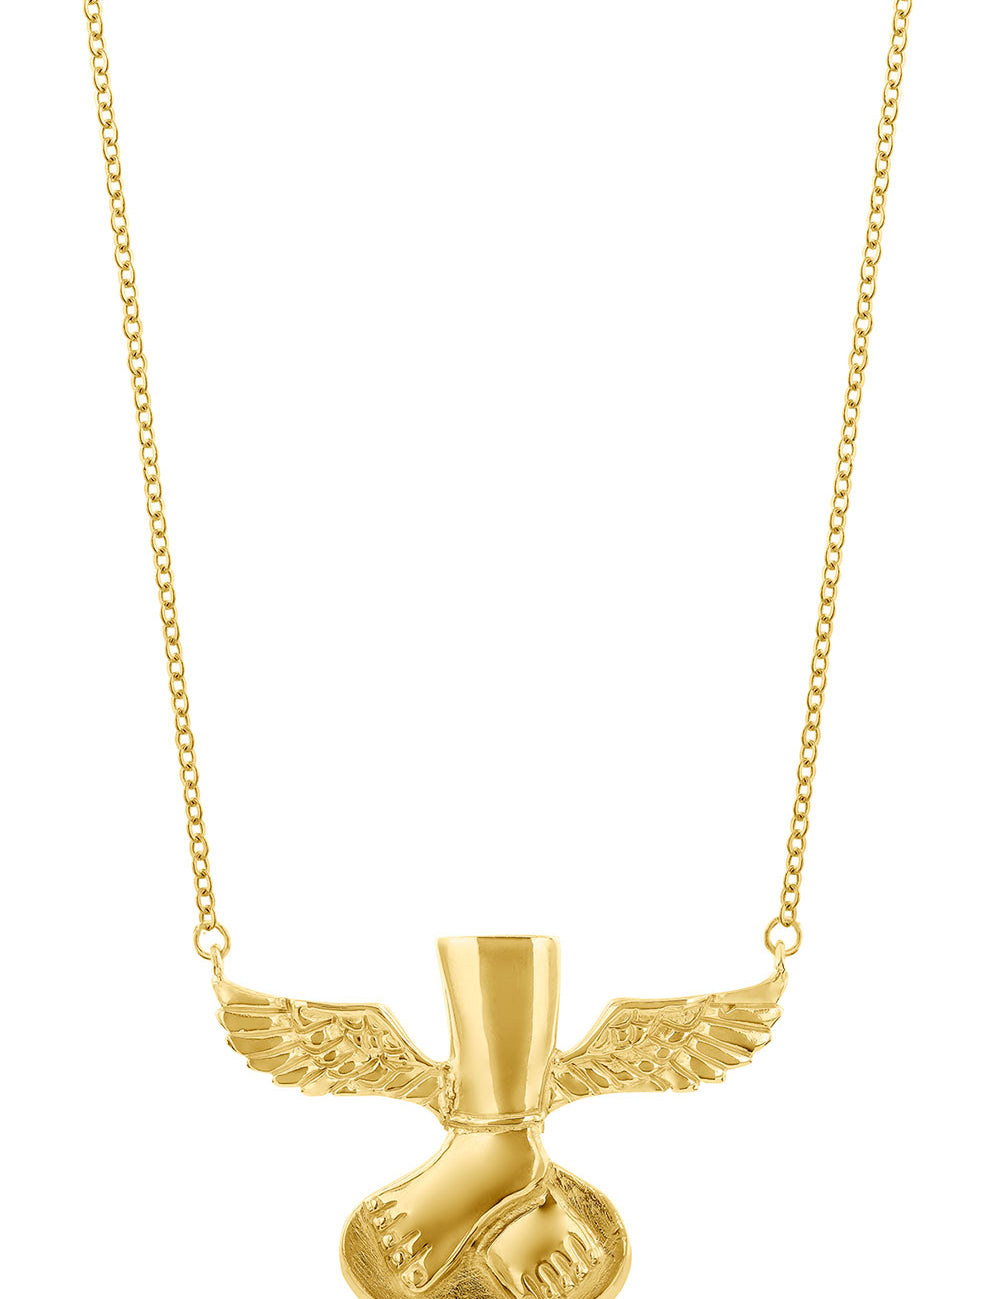 Necklace Winged Feet Grande - Sophie Simone Designs